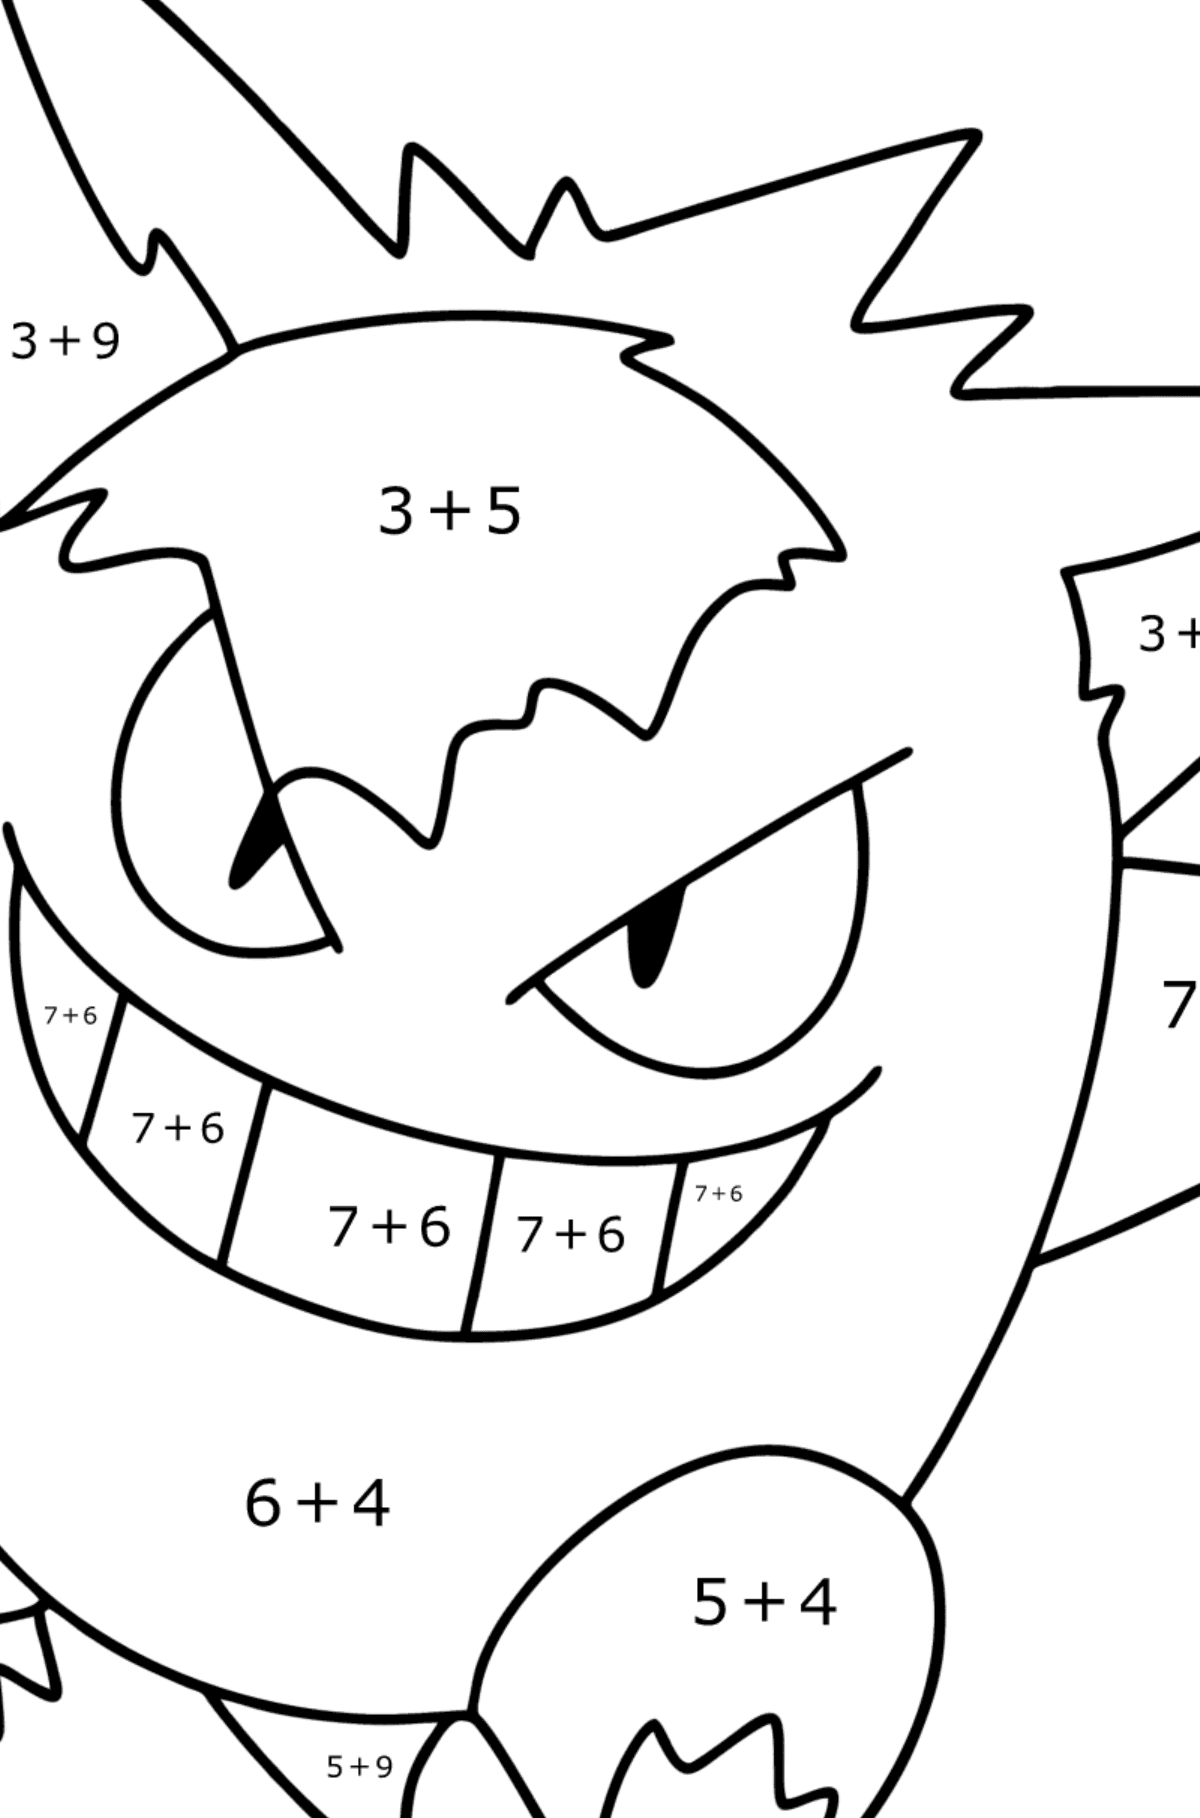 Pokémon Go Gengar coloring page - Math Coloring - Addition for Kids